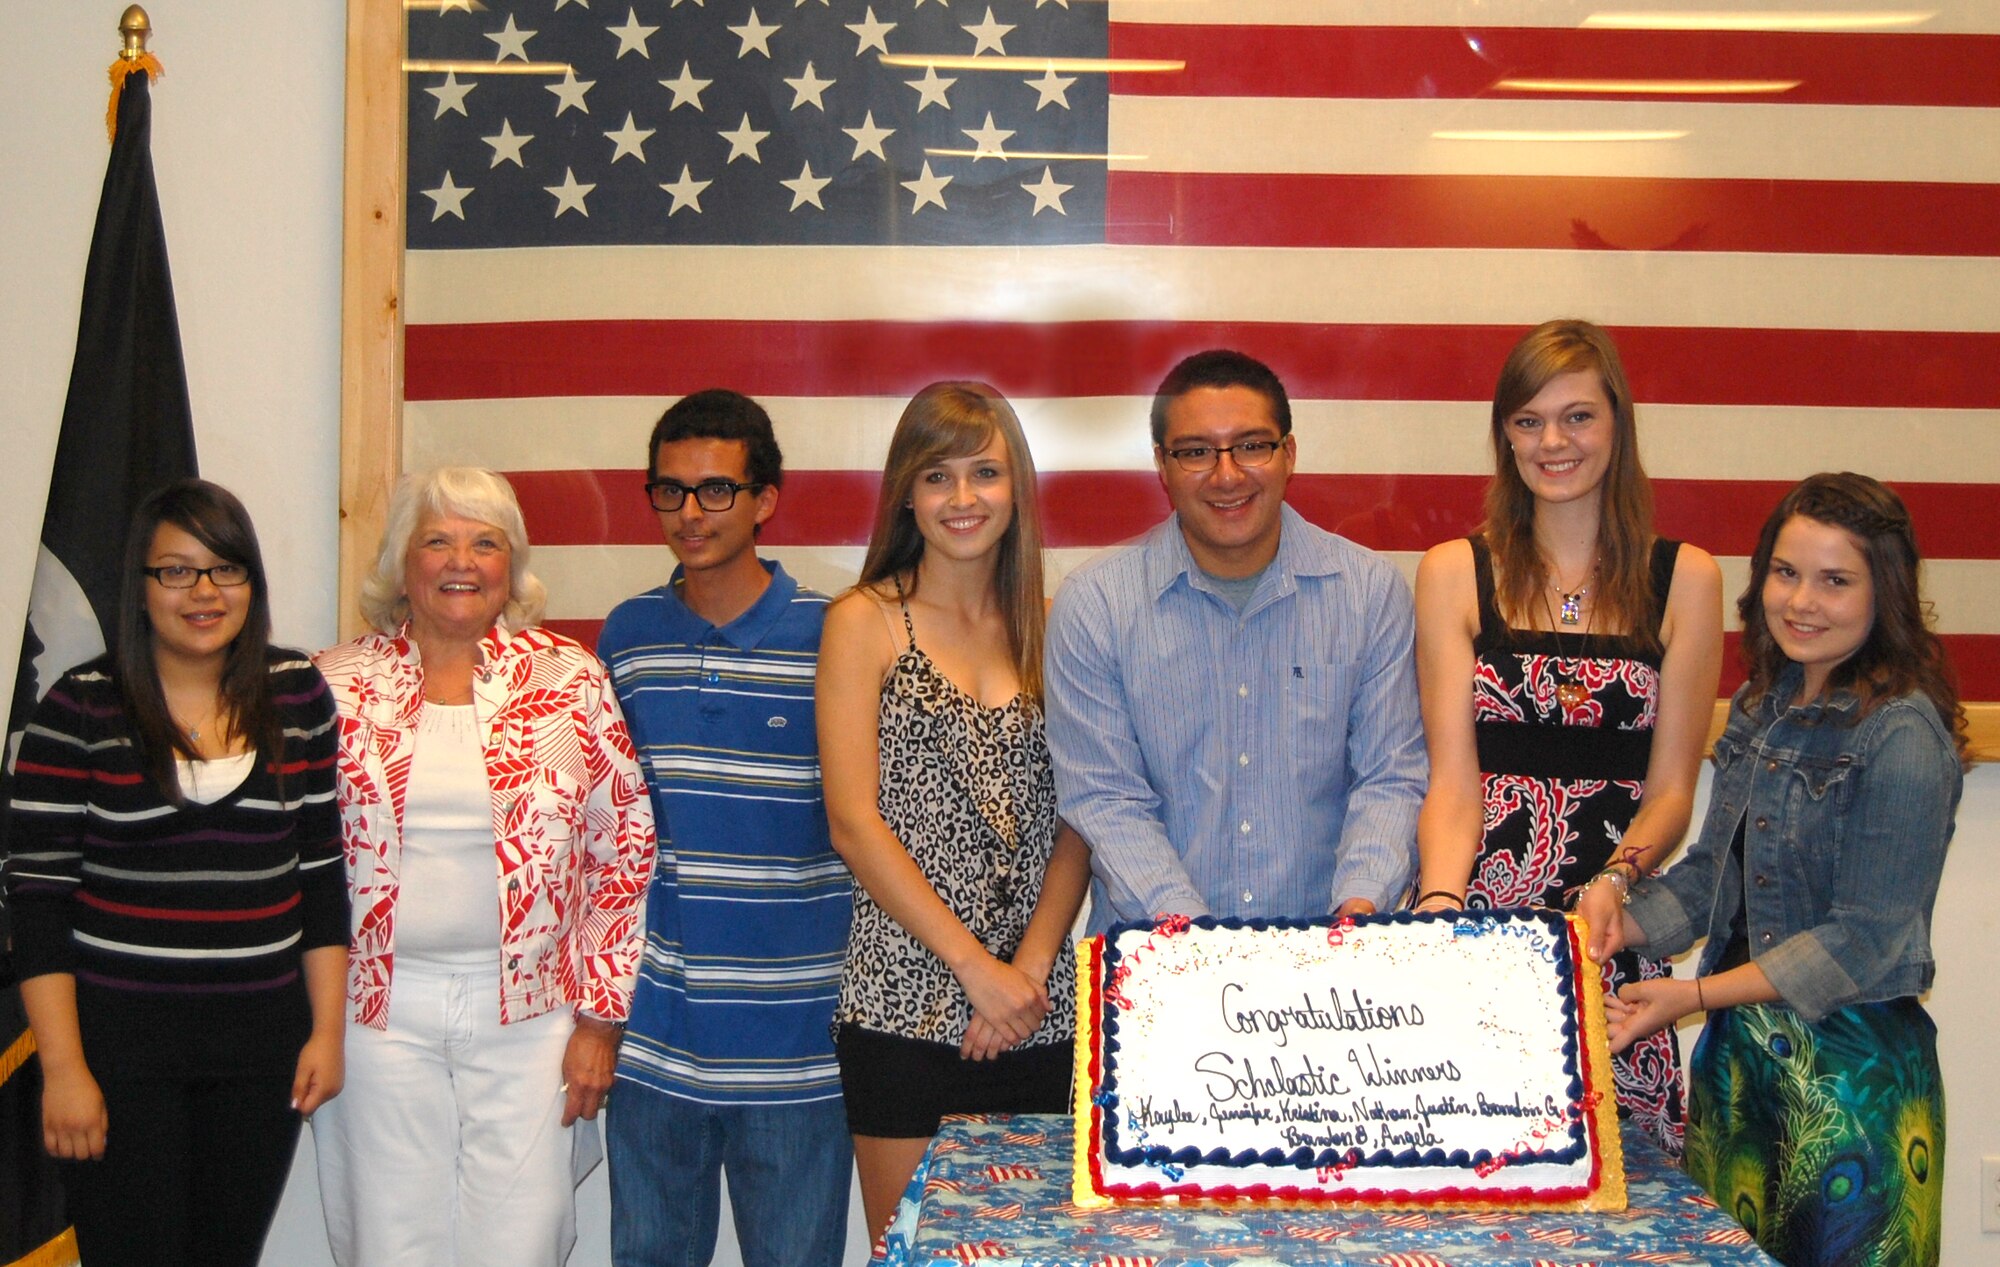 (From the left) Angela Bautista, American Veterans Scholarship Chair Charline Hill, Brandon Barnett, Kaylee McClelland, Nathan Federico, Kristina Farrell, and Jennifer Trueblood celebrate at Tucson’s AMVETS Post 770 Ladies Auxiliary 2012 Scholarship Awards Dinner, May 12. The post awarded seven $500 scholarships and one $100 recognition award to children of 162nd Fighter Wing members. (Scholarship recipients Brandon and Justin Garms are not pictured.) (U.S. Air Force photo/Airman 1st Class Roberto Gonzalez)